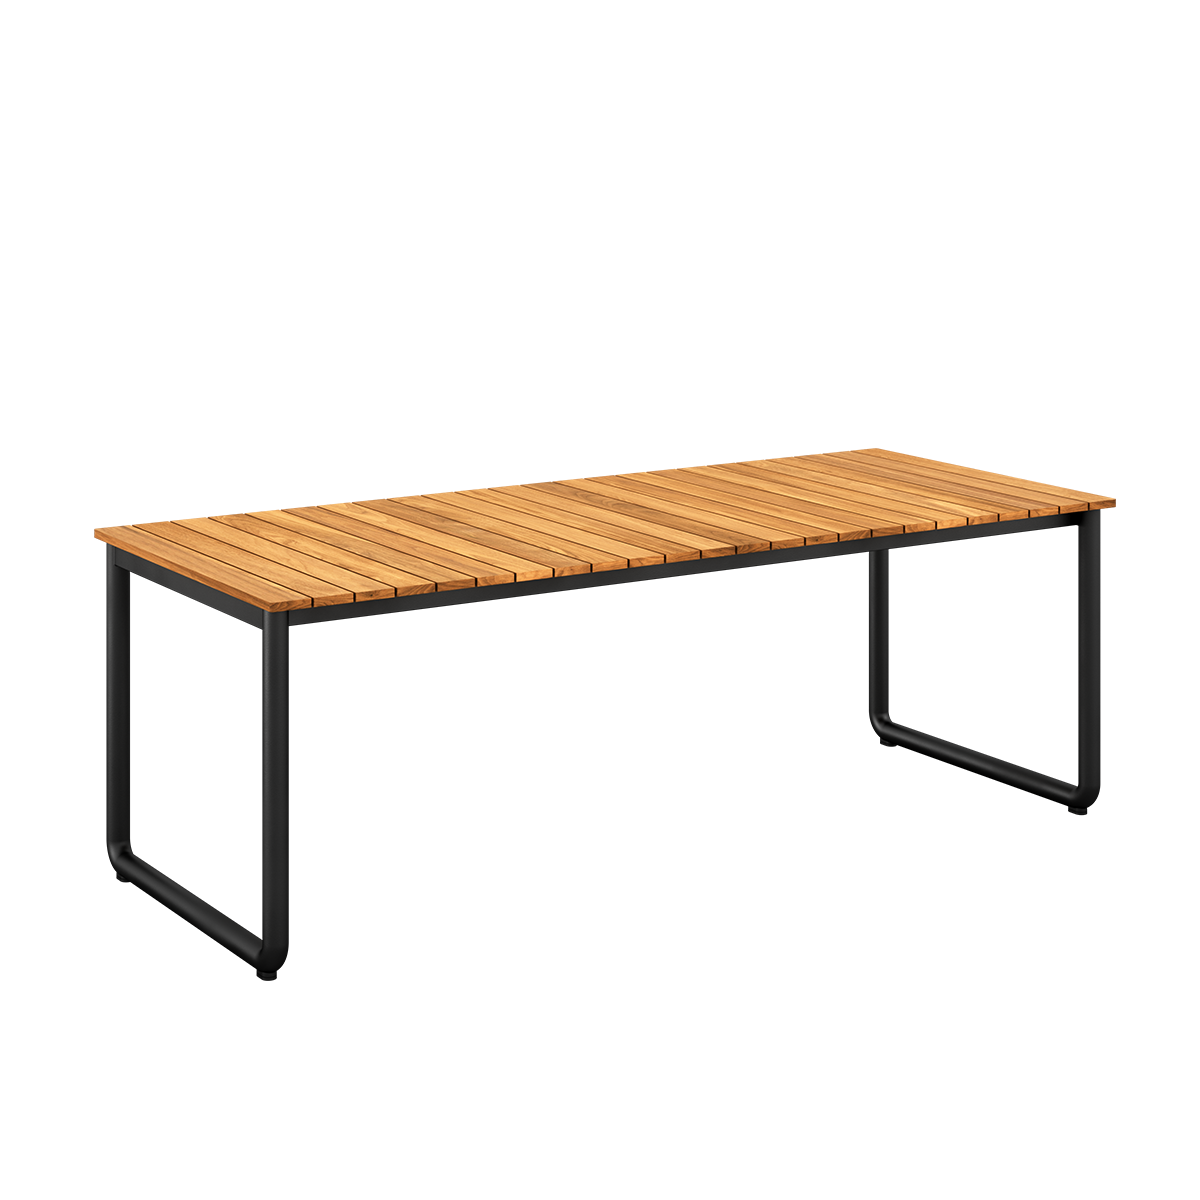 Patio Dining Table - 214x90 [Contract]